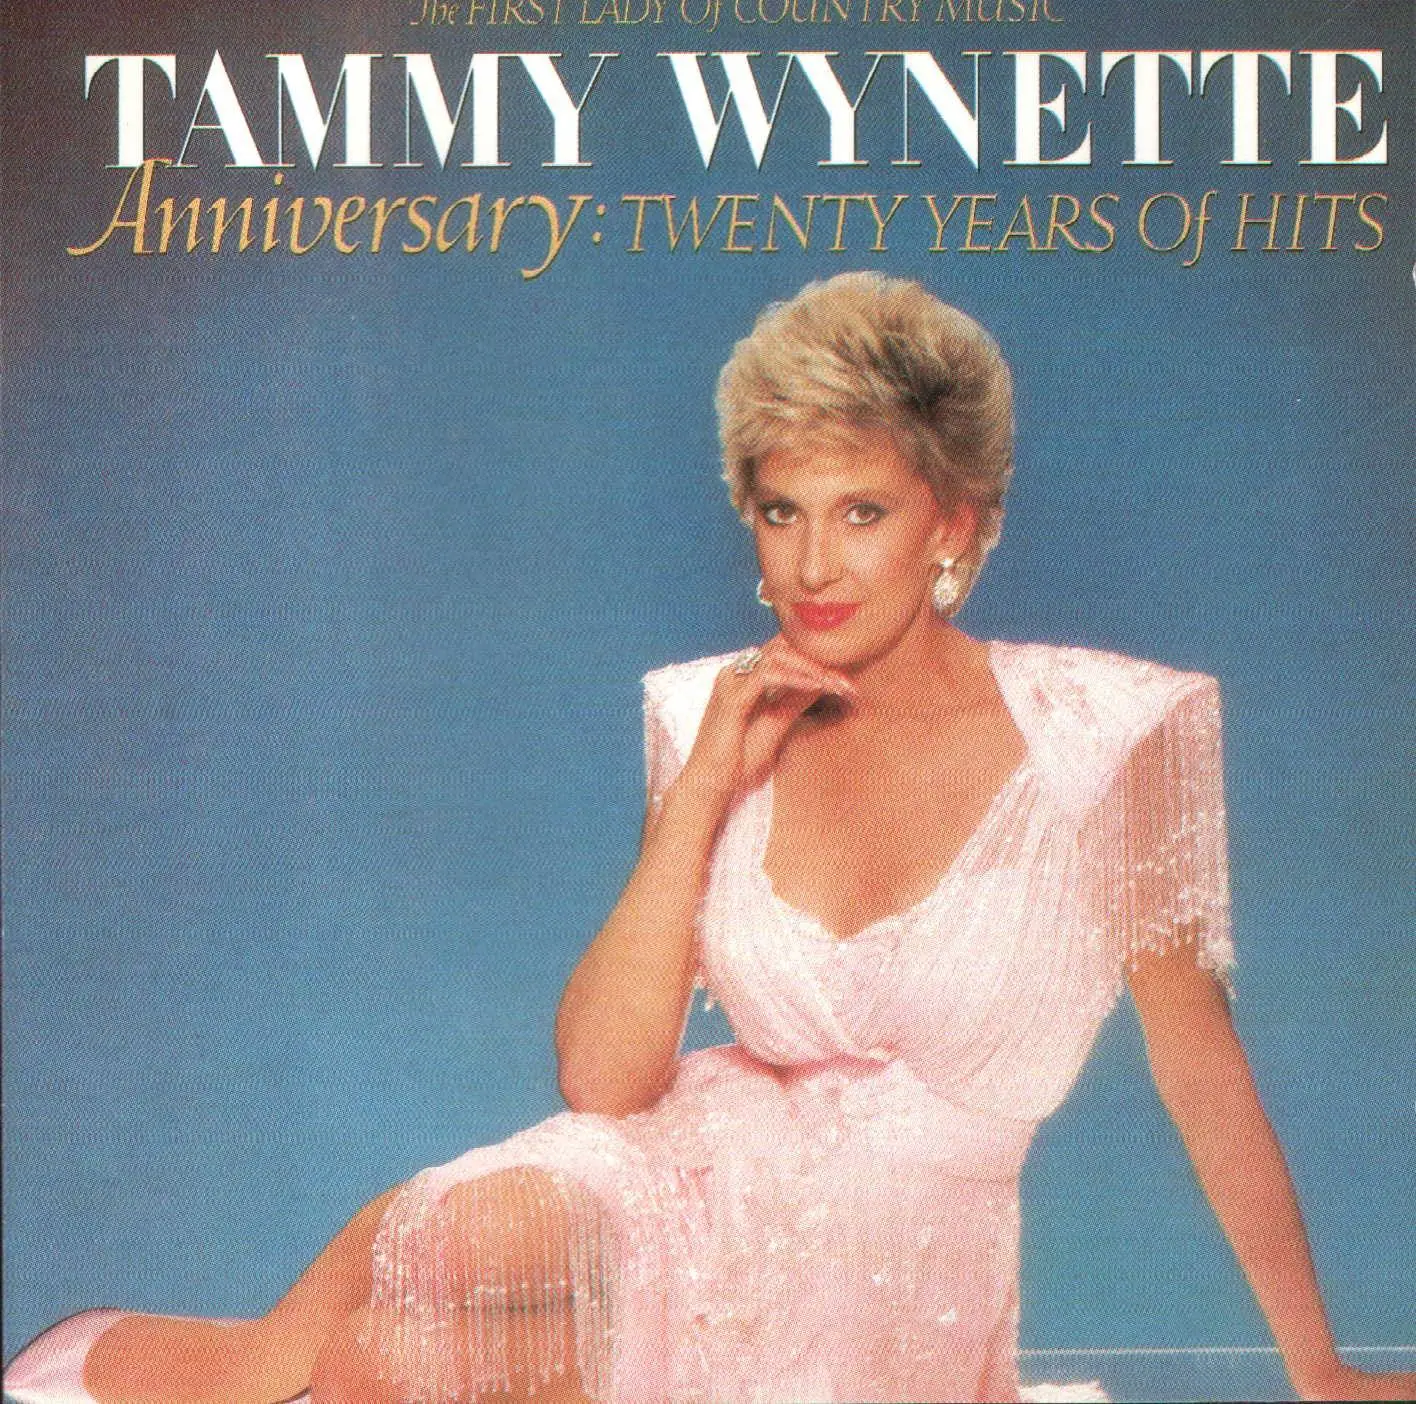 Show me a picture of tammy wynette